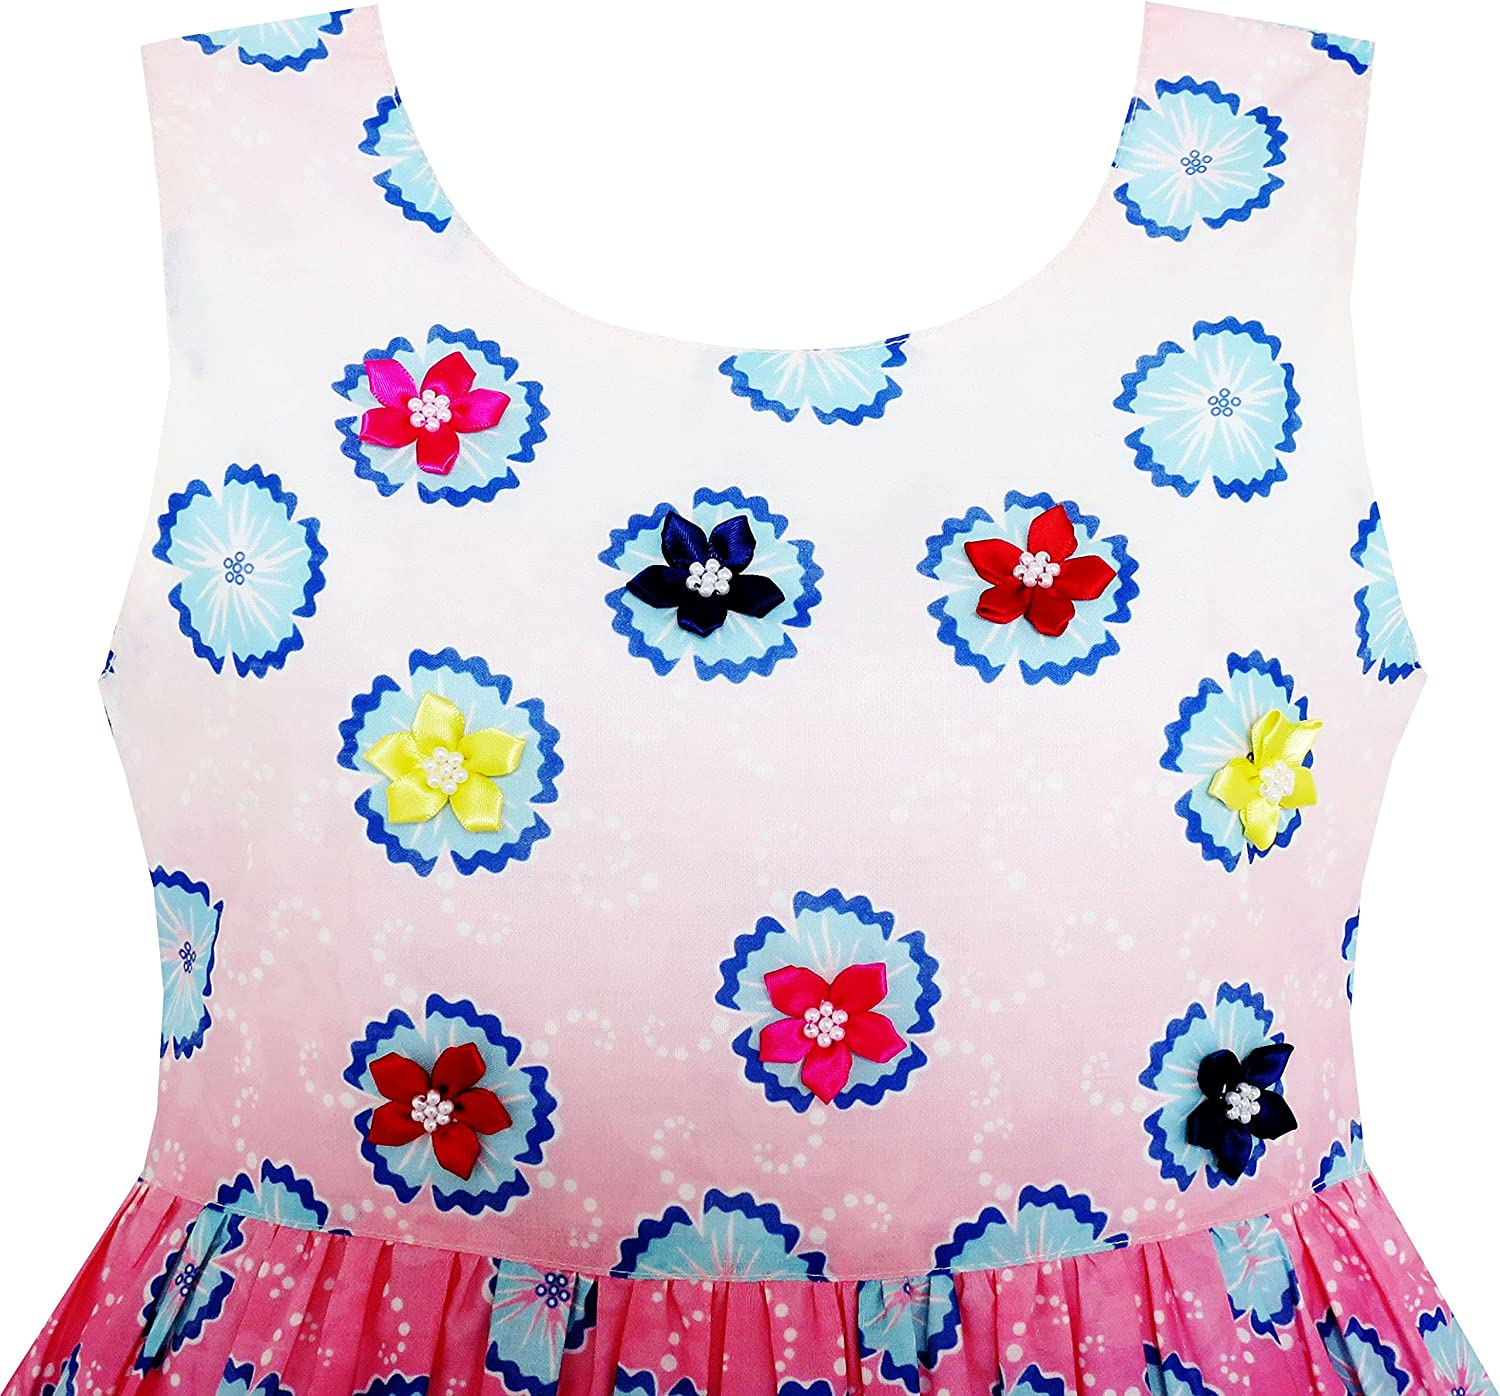 Sky Fantasy Colorful Angel Wings Feather Print Dress for Girls - Perfect for Dress Up and Playtime!